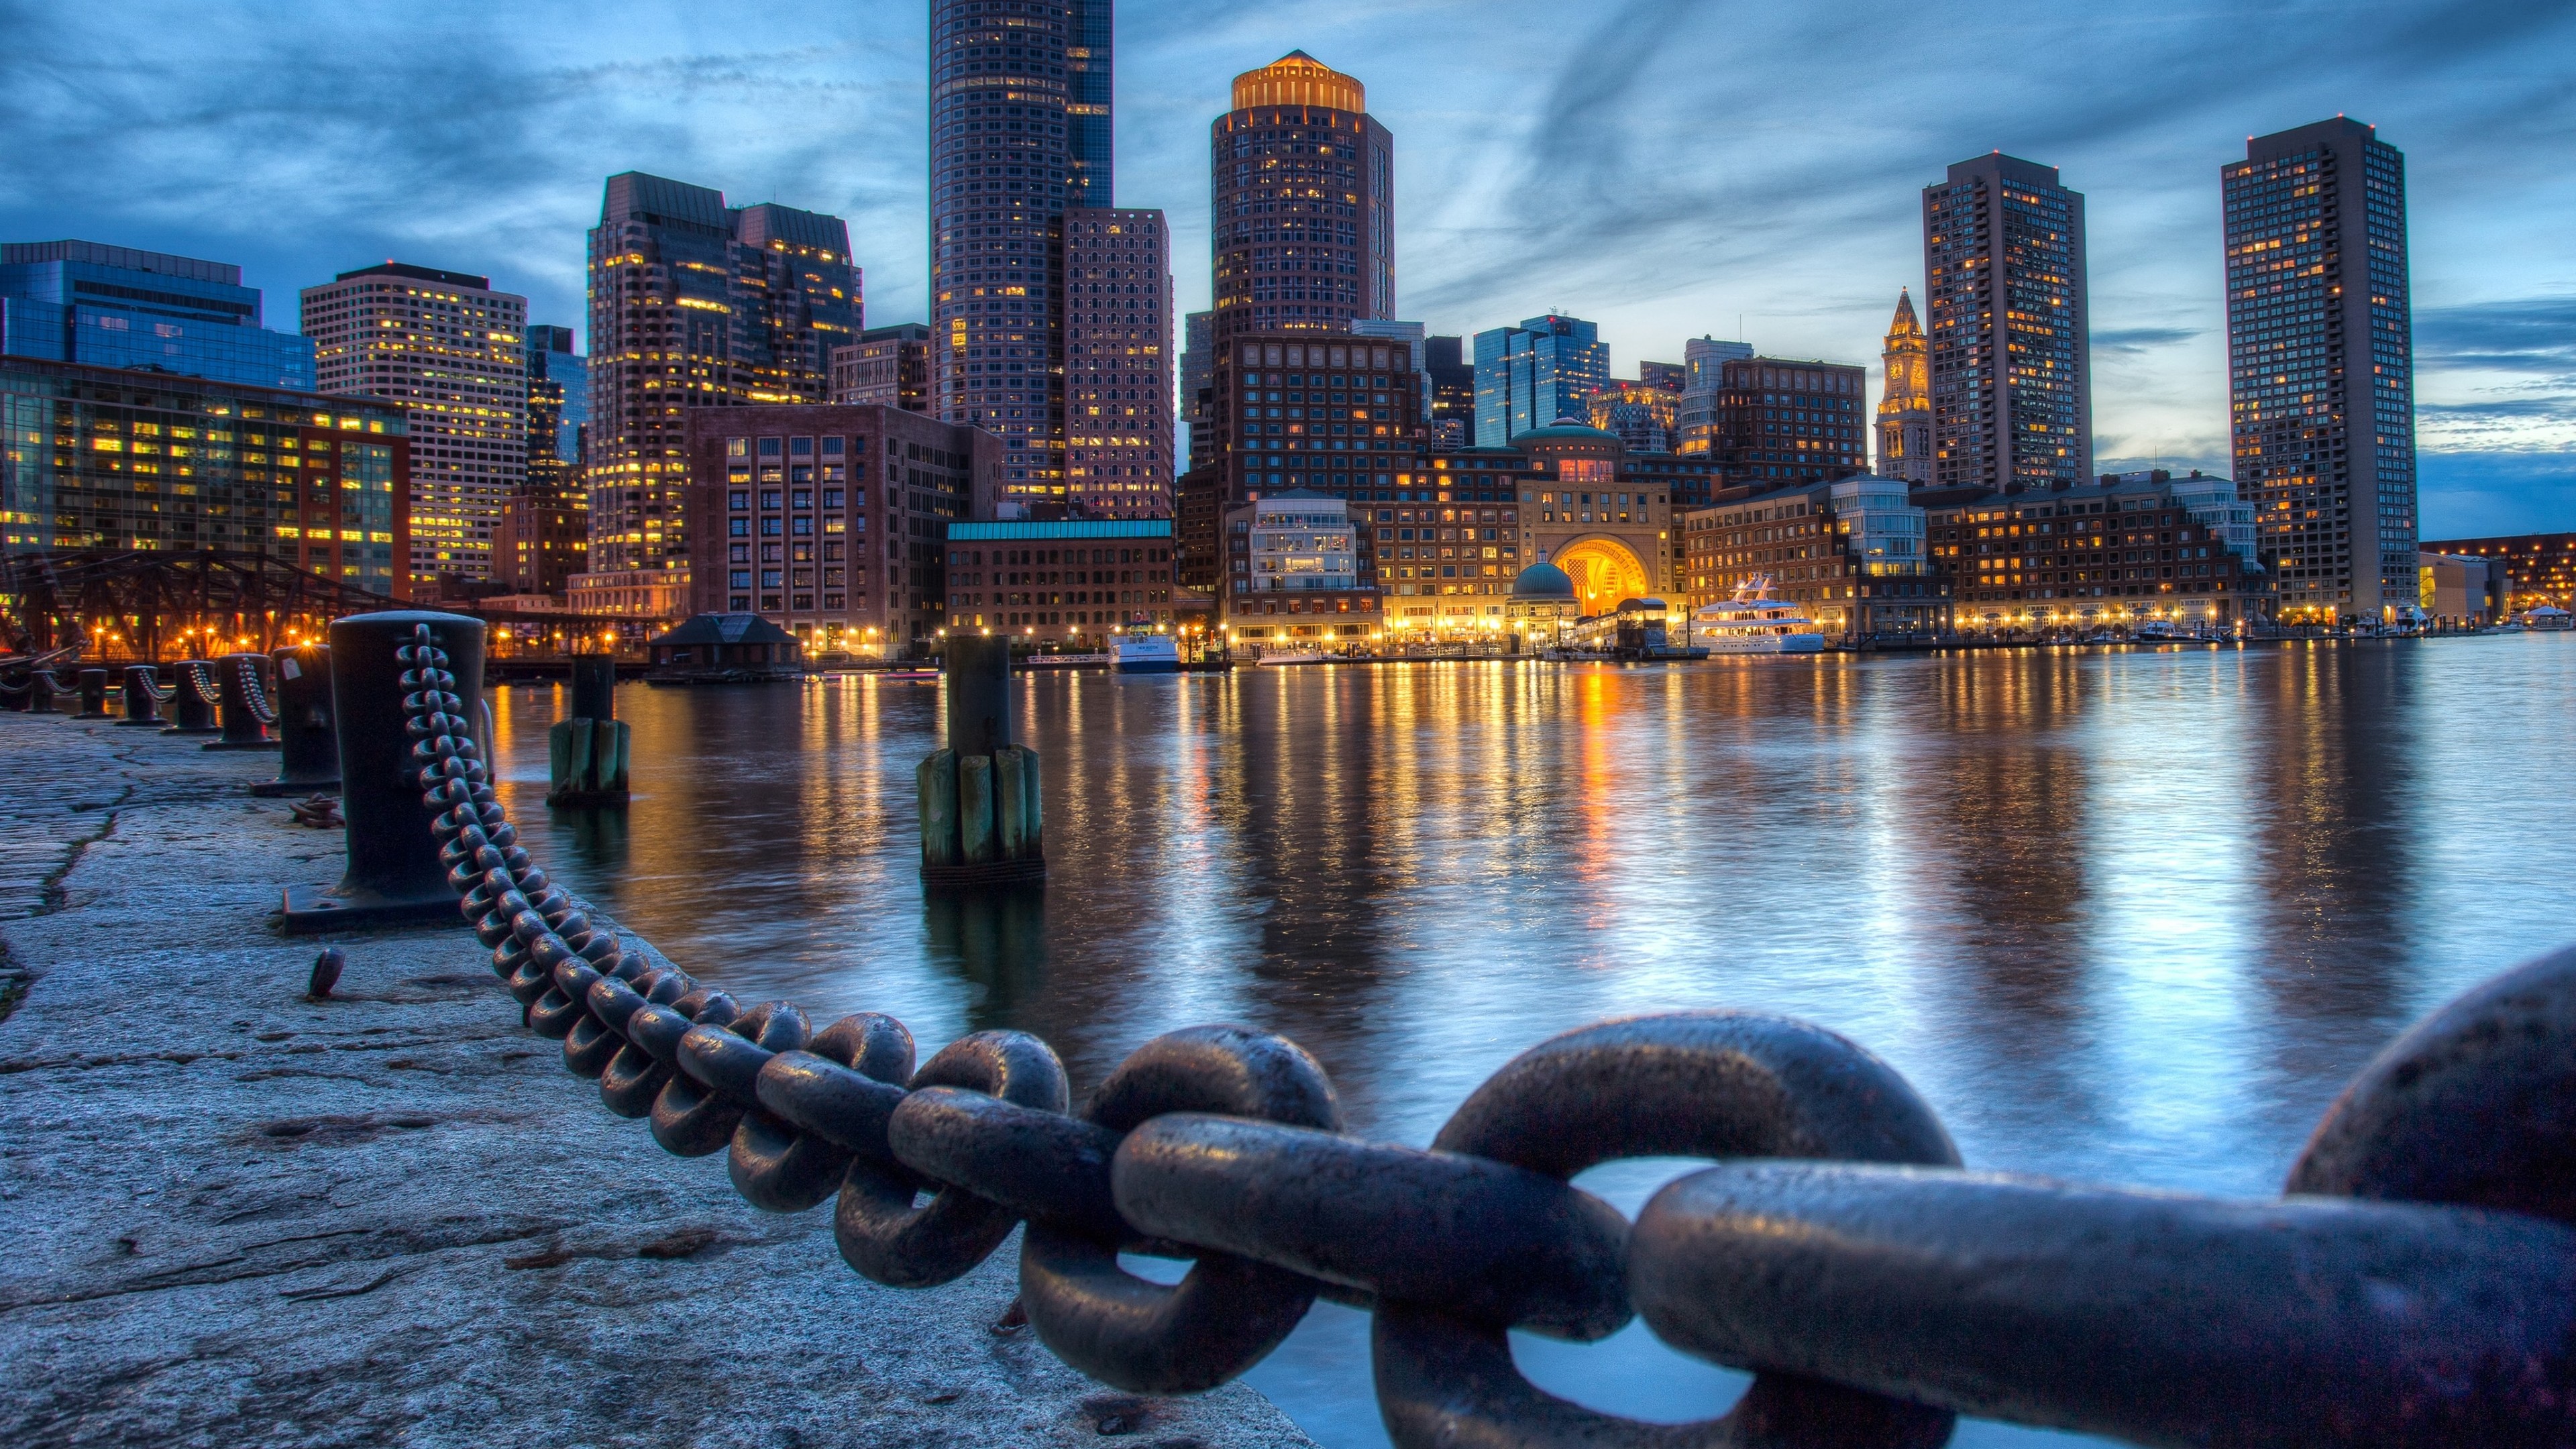 3840x2160 20 Boston HD Wallpapers | Backgrounds - Wallpaper Abyss